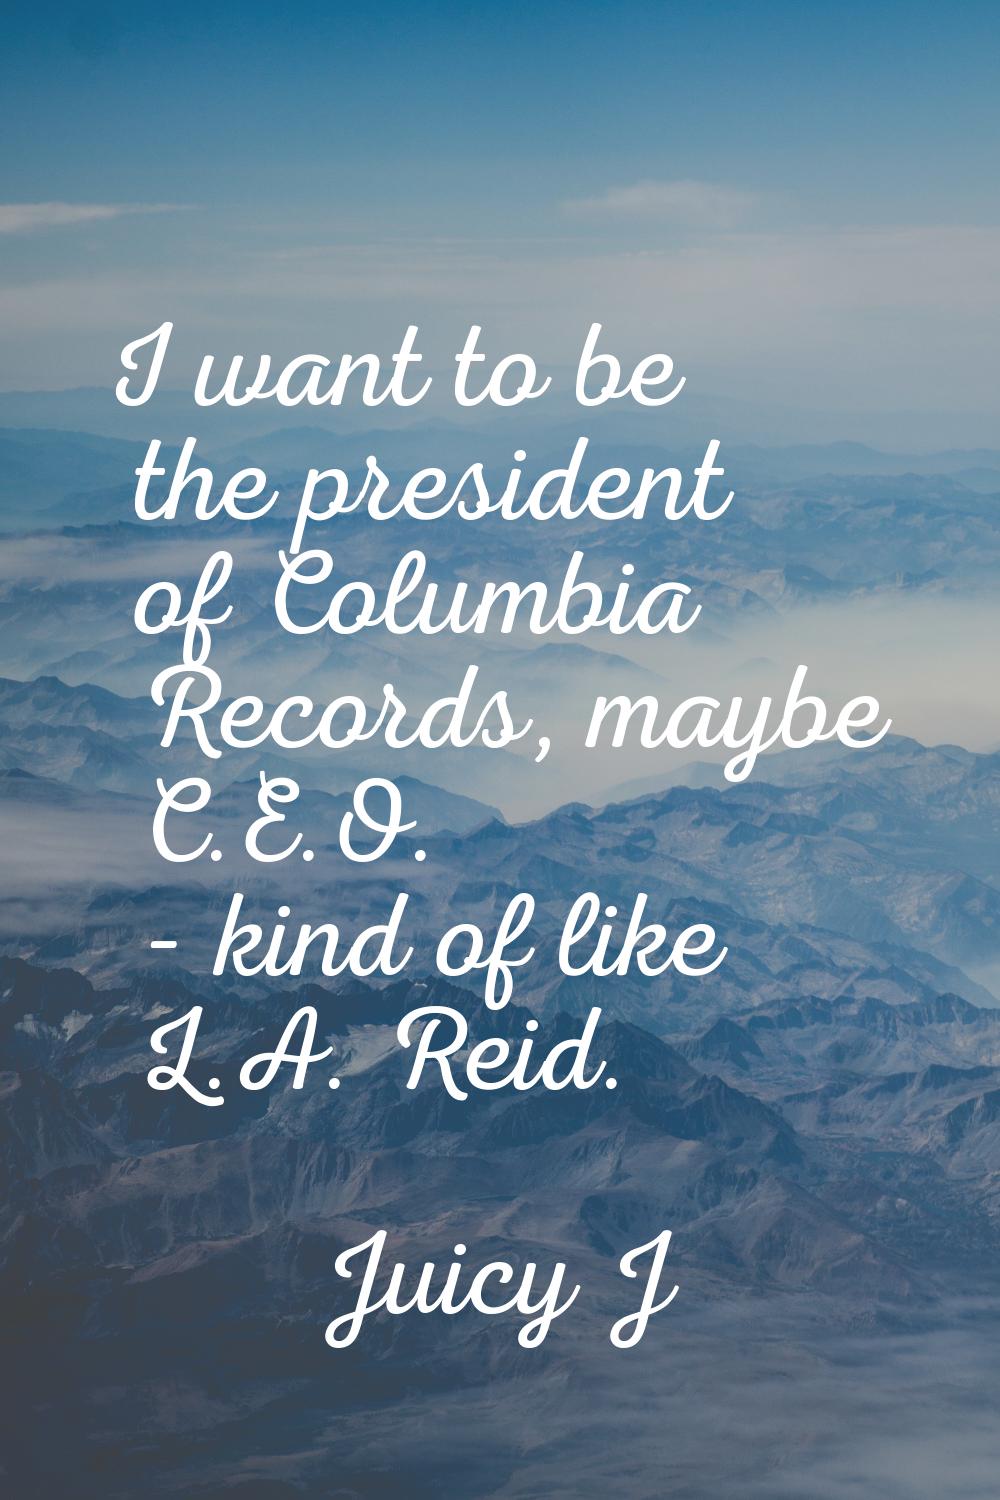 I want to be the president of Columbia Records, maybe C.E.O. - kind of like L.A. Reid.